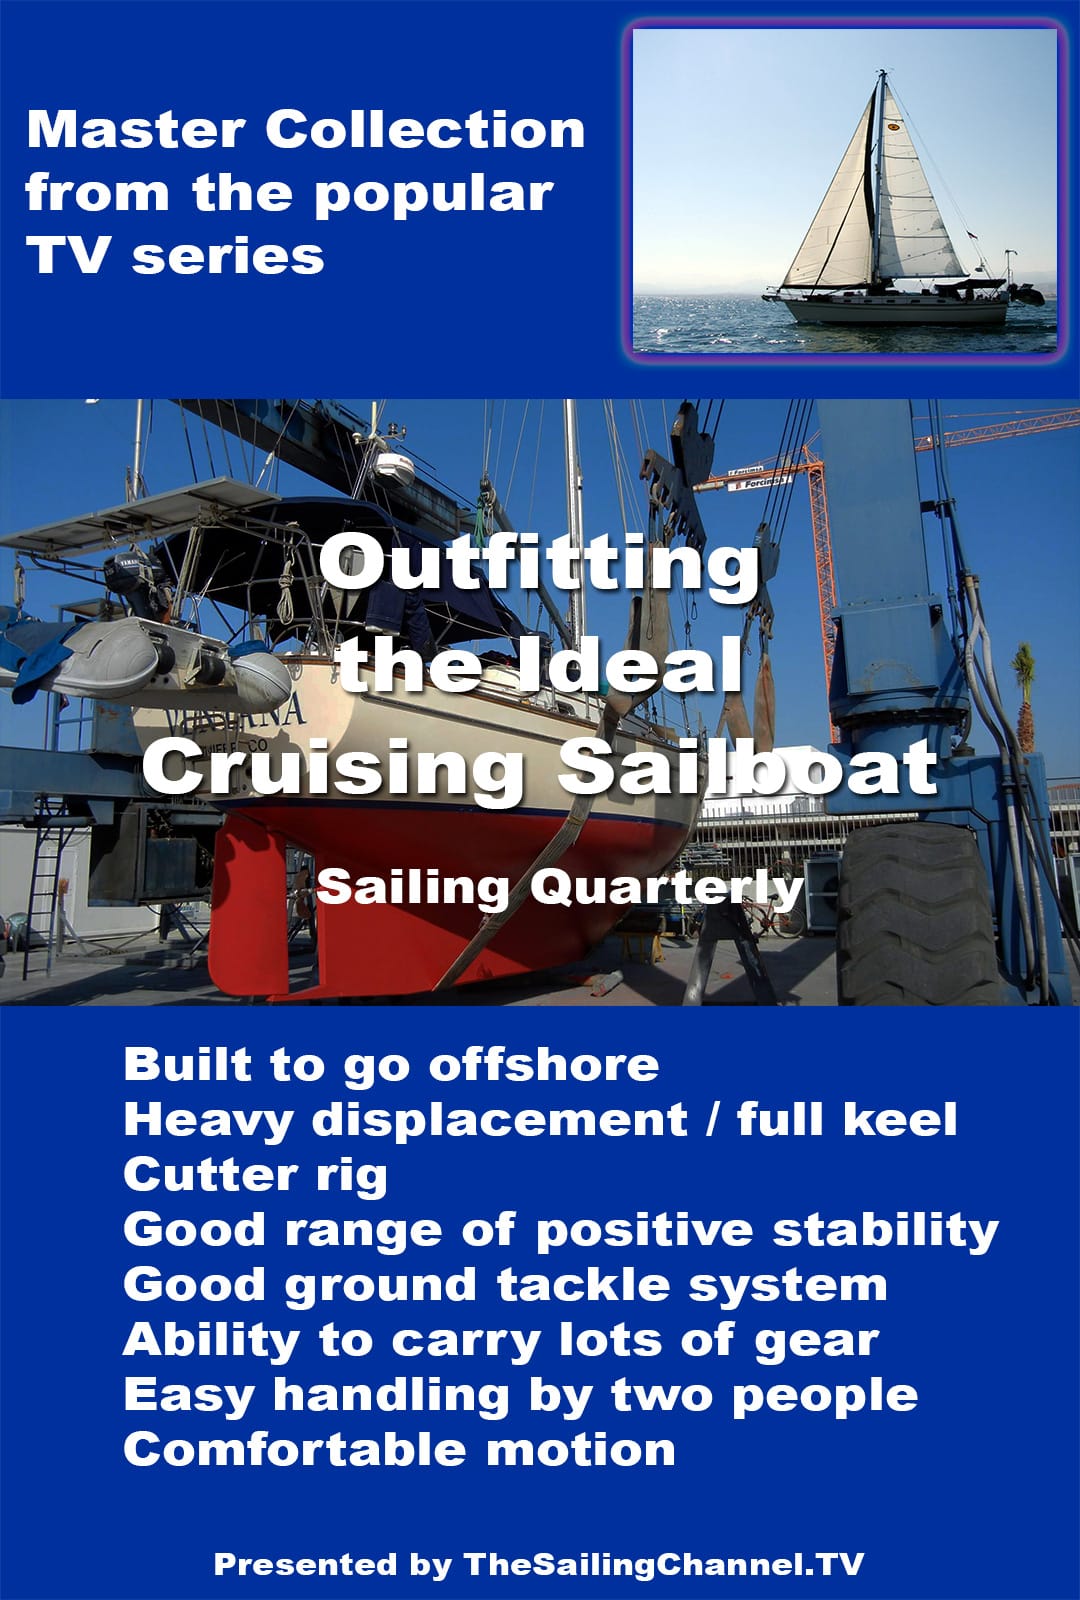 Outfitting the Ideal Cruising Sailboat from Sailing Quarterly Video Magazine